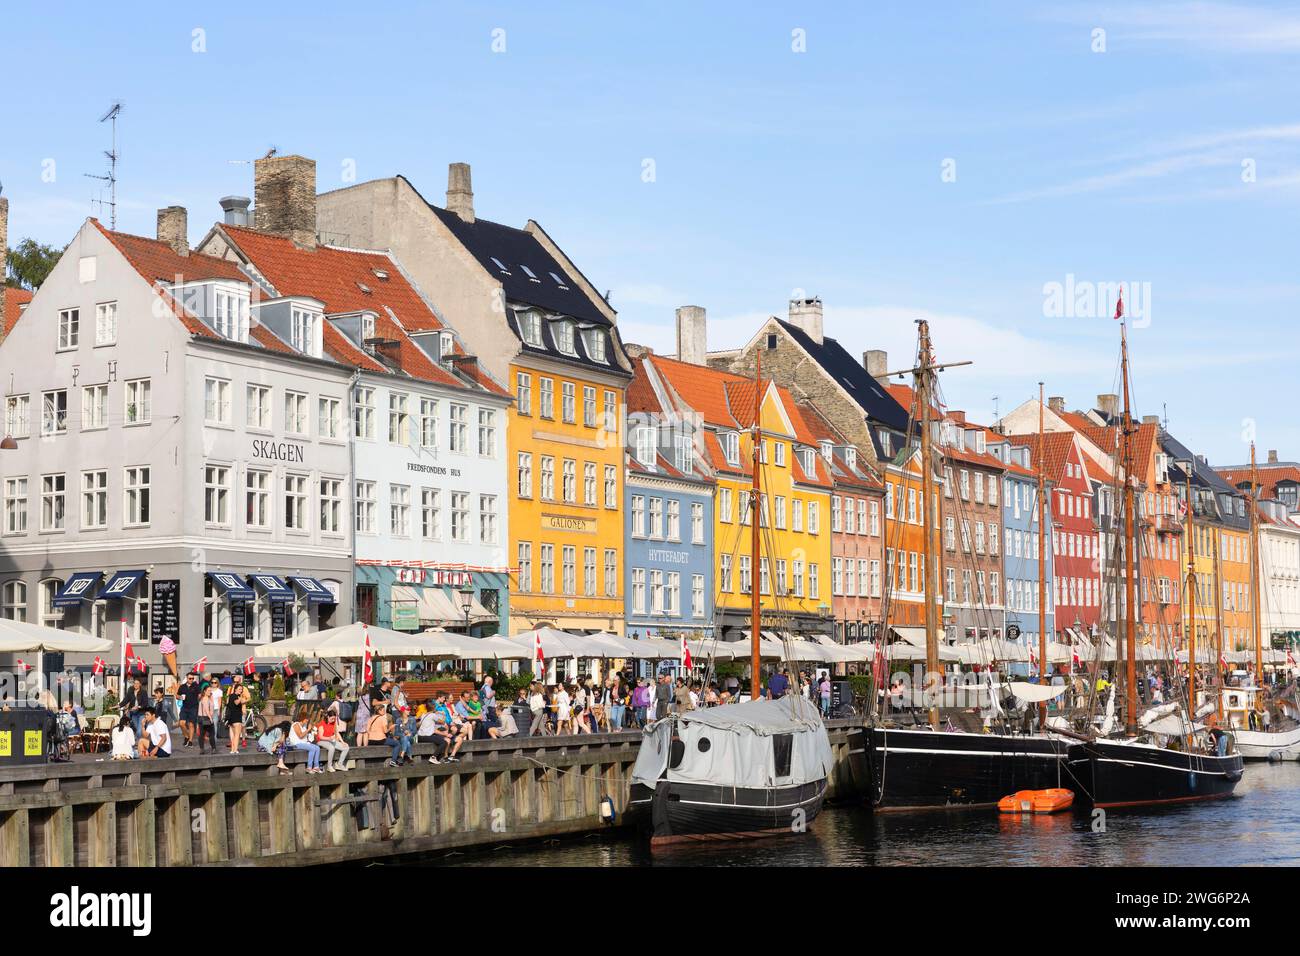 Nyhavn or New Harbour is a 17th-century harbour, canal and entertainment district in Copenhagen. Stock Photo